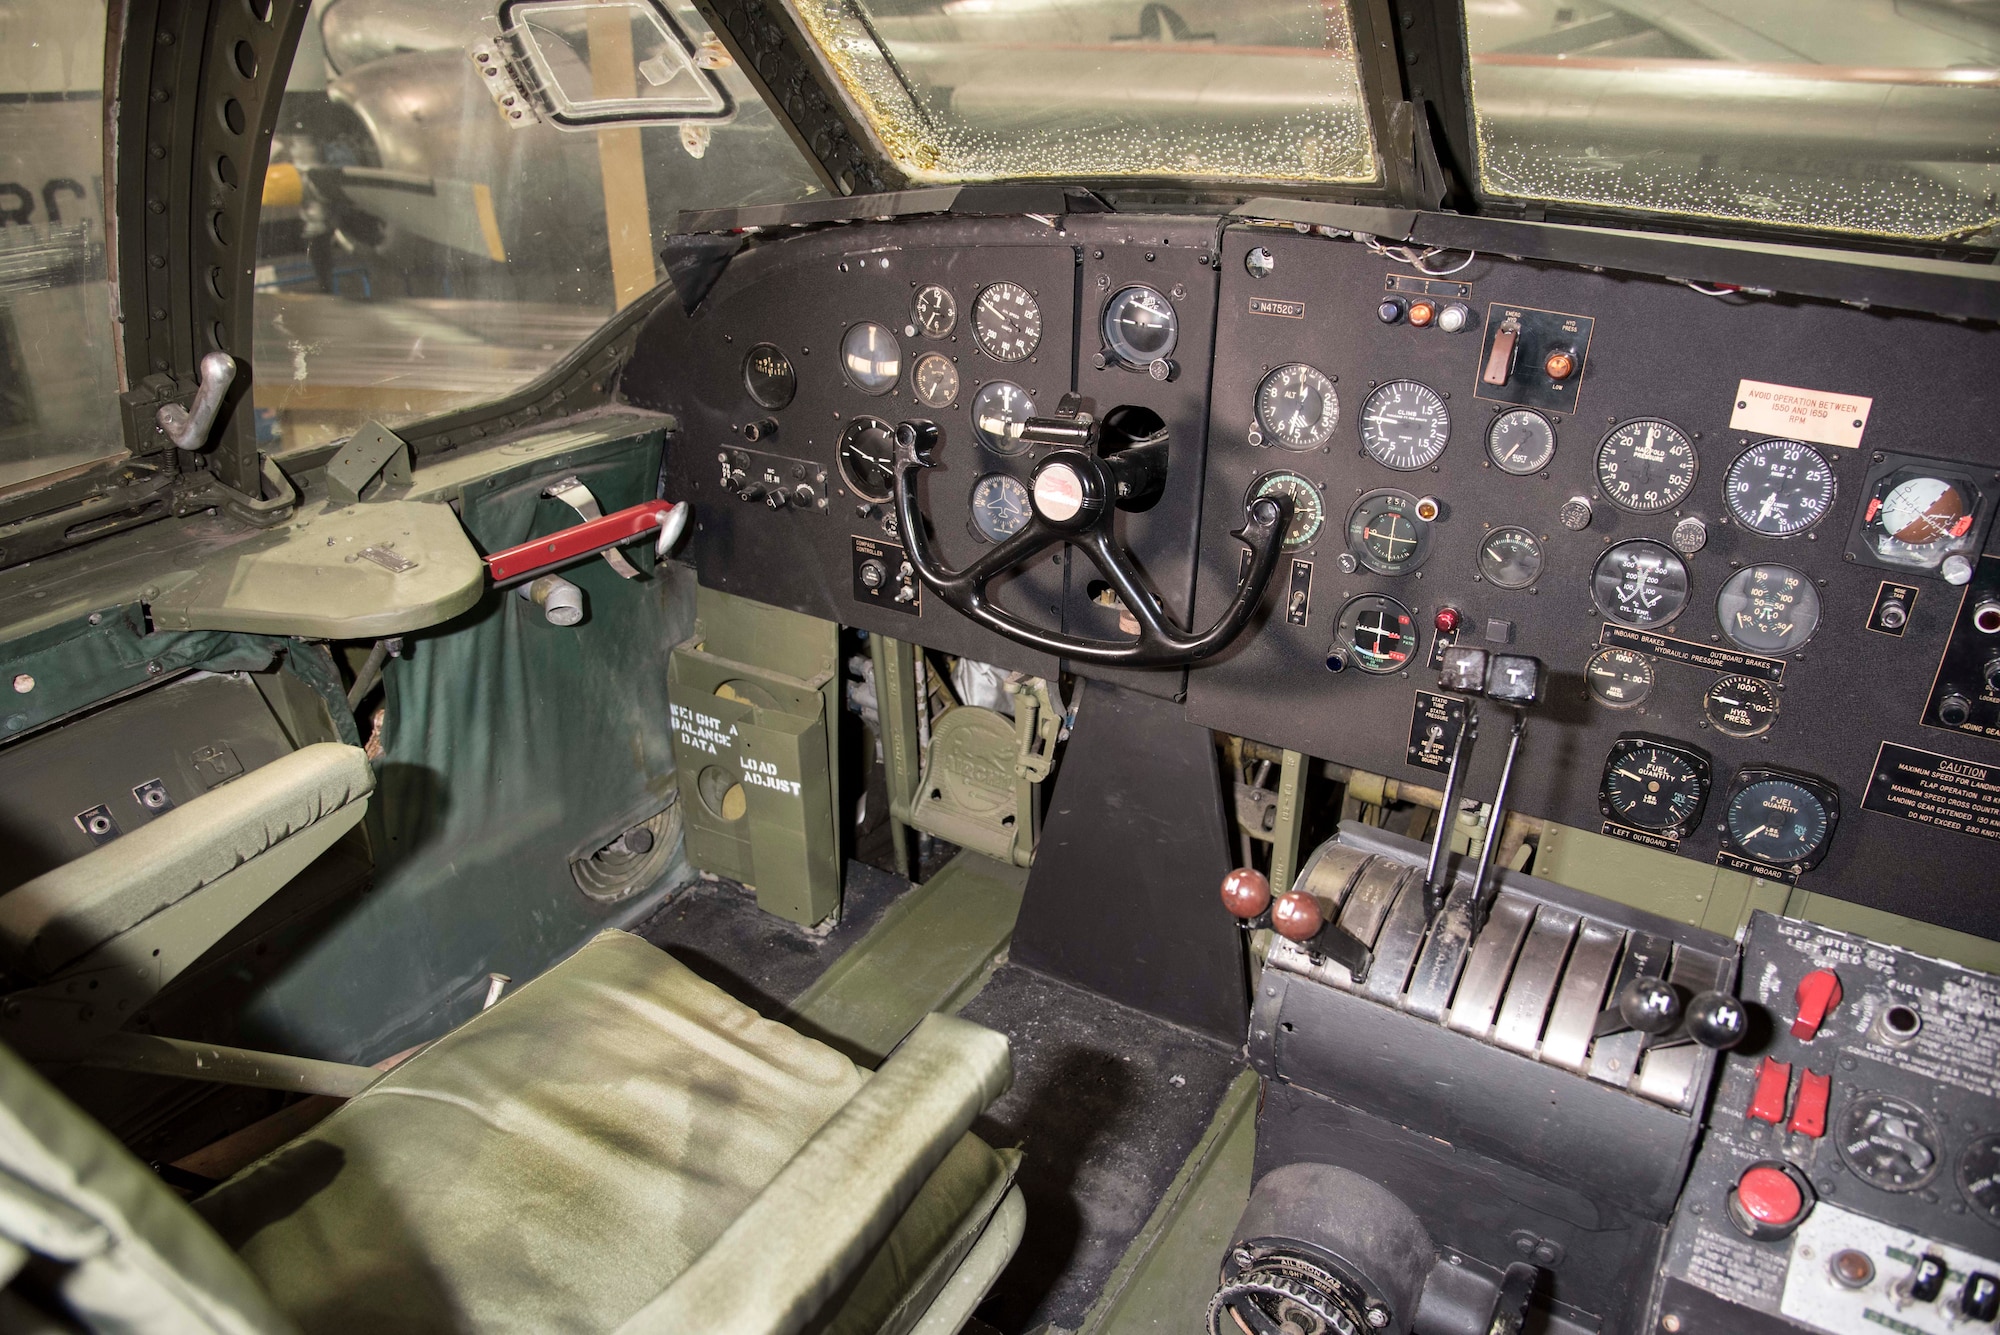 DAYTON, Ohio -- Fairchild C-82 Packet cockpit in the Global Reach Gallery at the National Museum of the United States Air Force. (U.S. Air Force photo by Ken LaRock)
